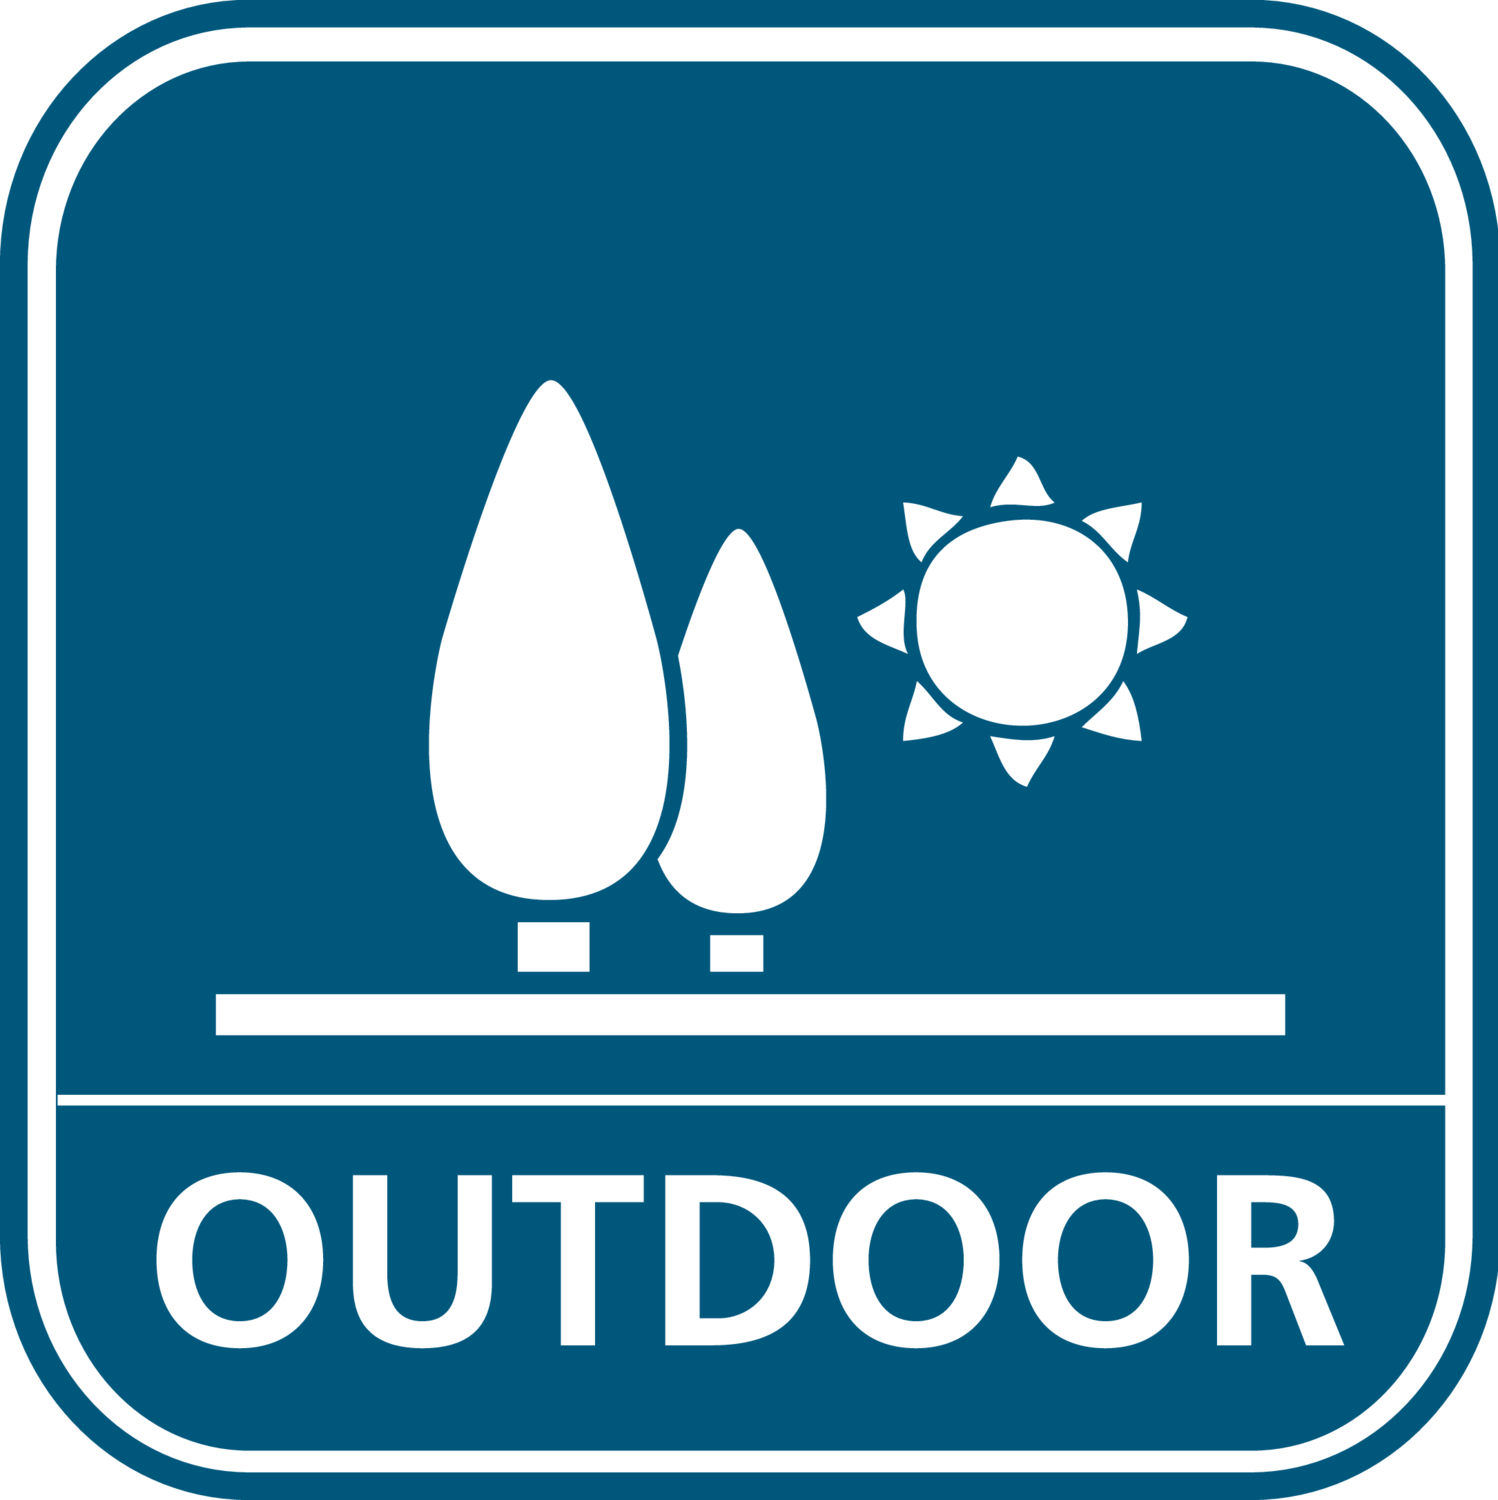 Suitable for outdoor areas